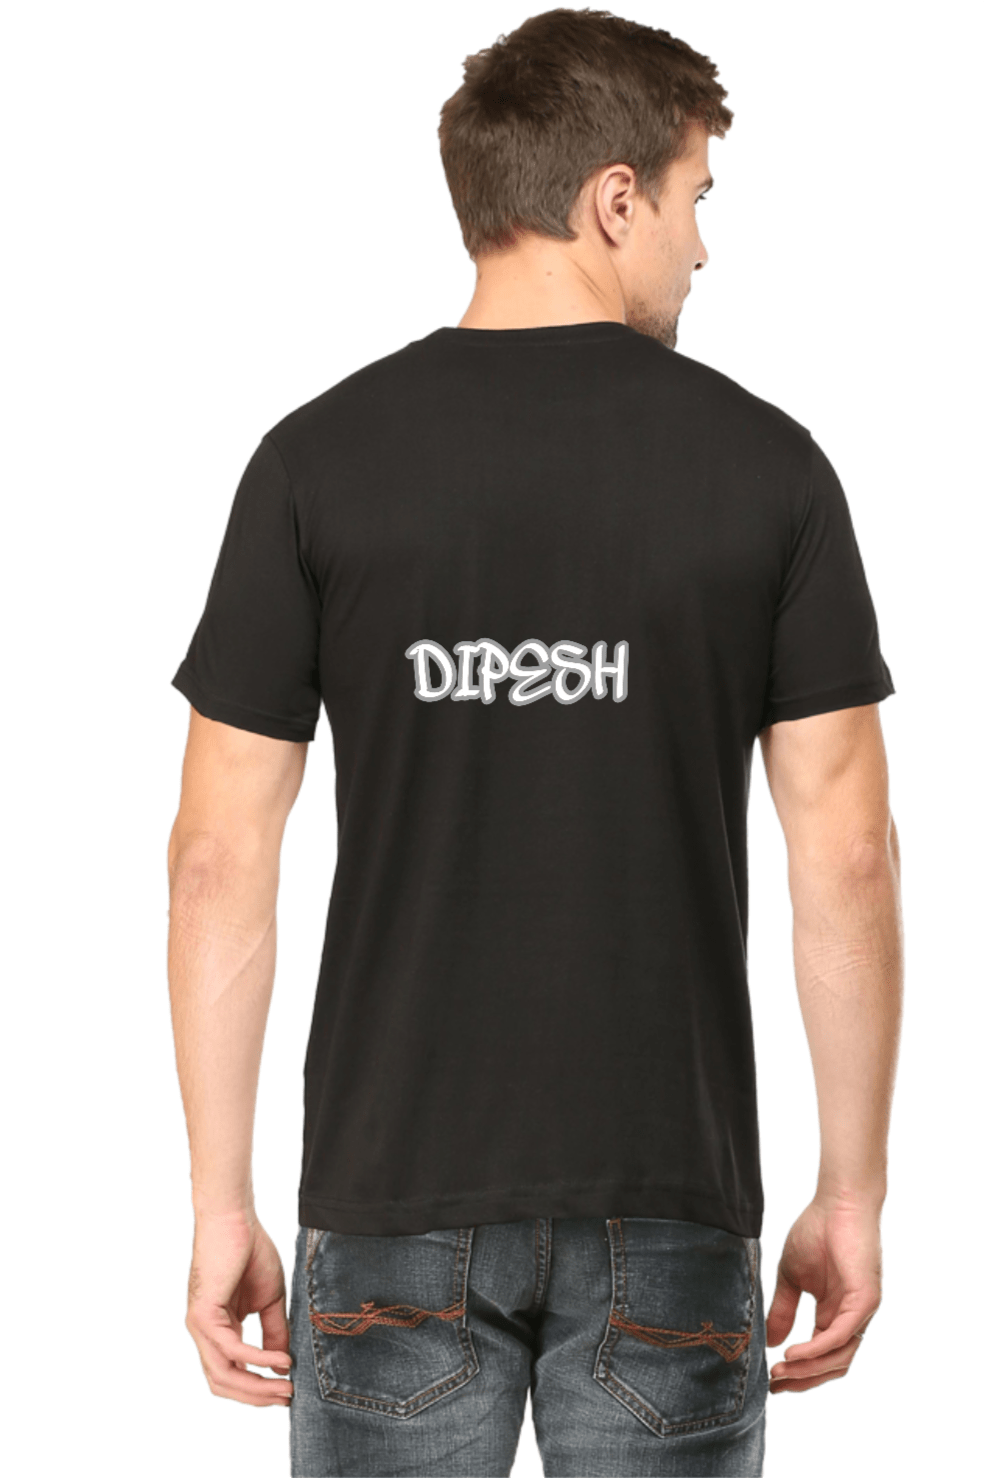 Men's T-shirt black with Best Brother caption printed at front and Brother's name at the back. Men's T-shirt black with Best Brother caption. Apt gift for a brother.